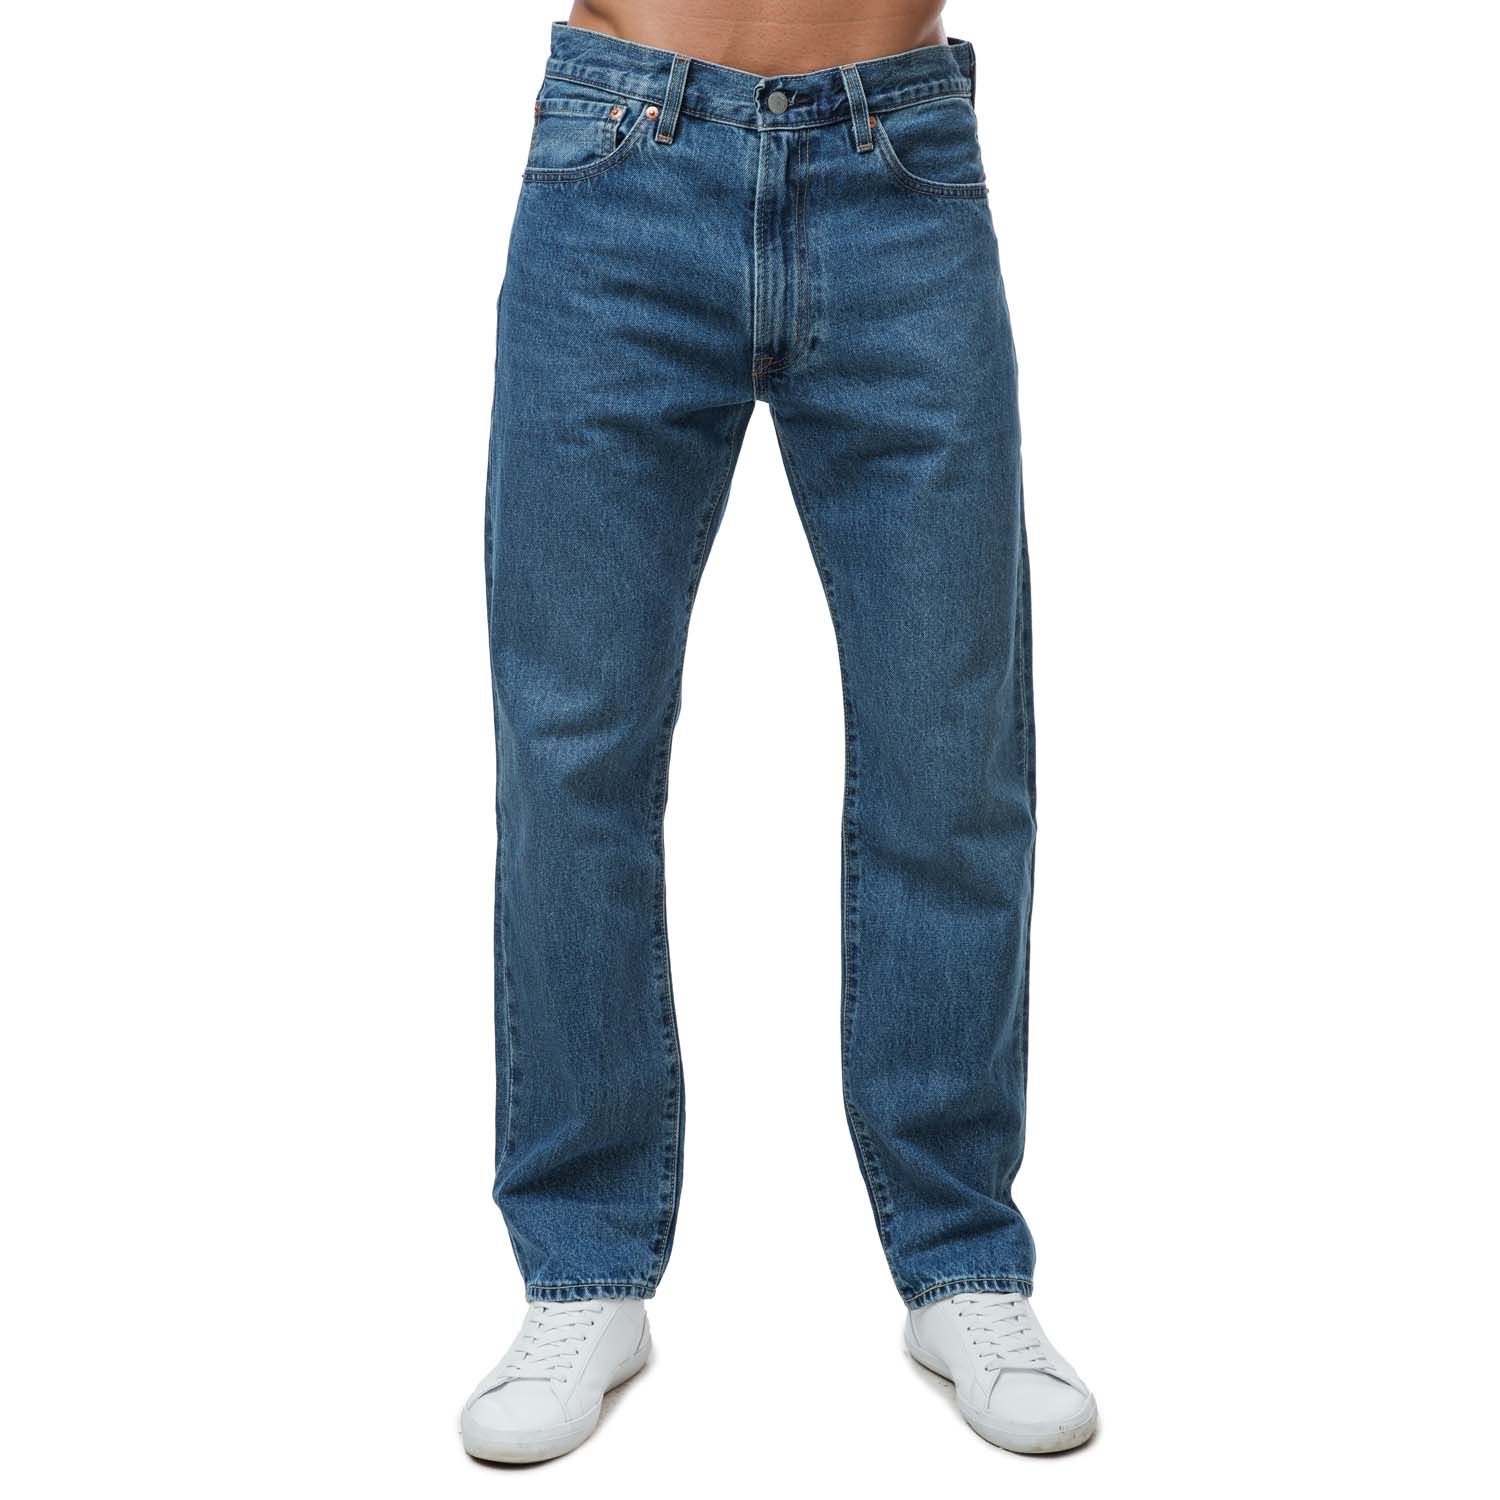 Mens 551 Authentic Straight Fit Jeans